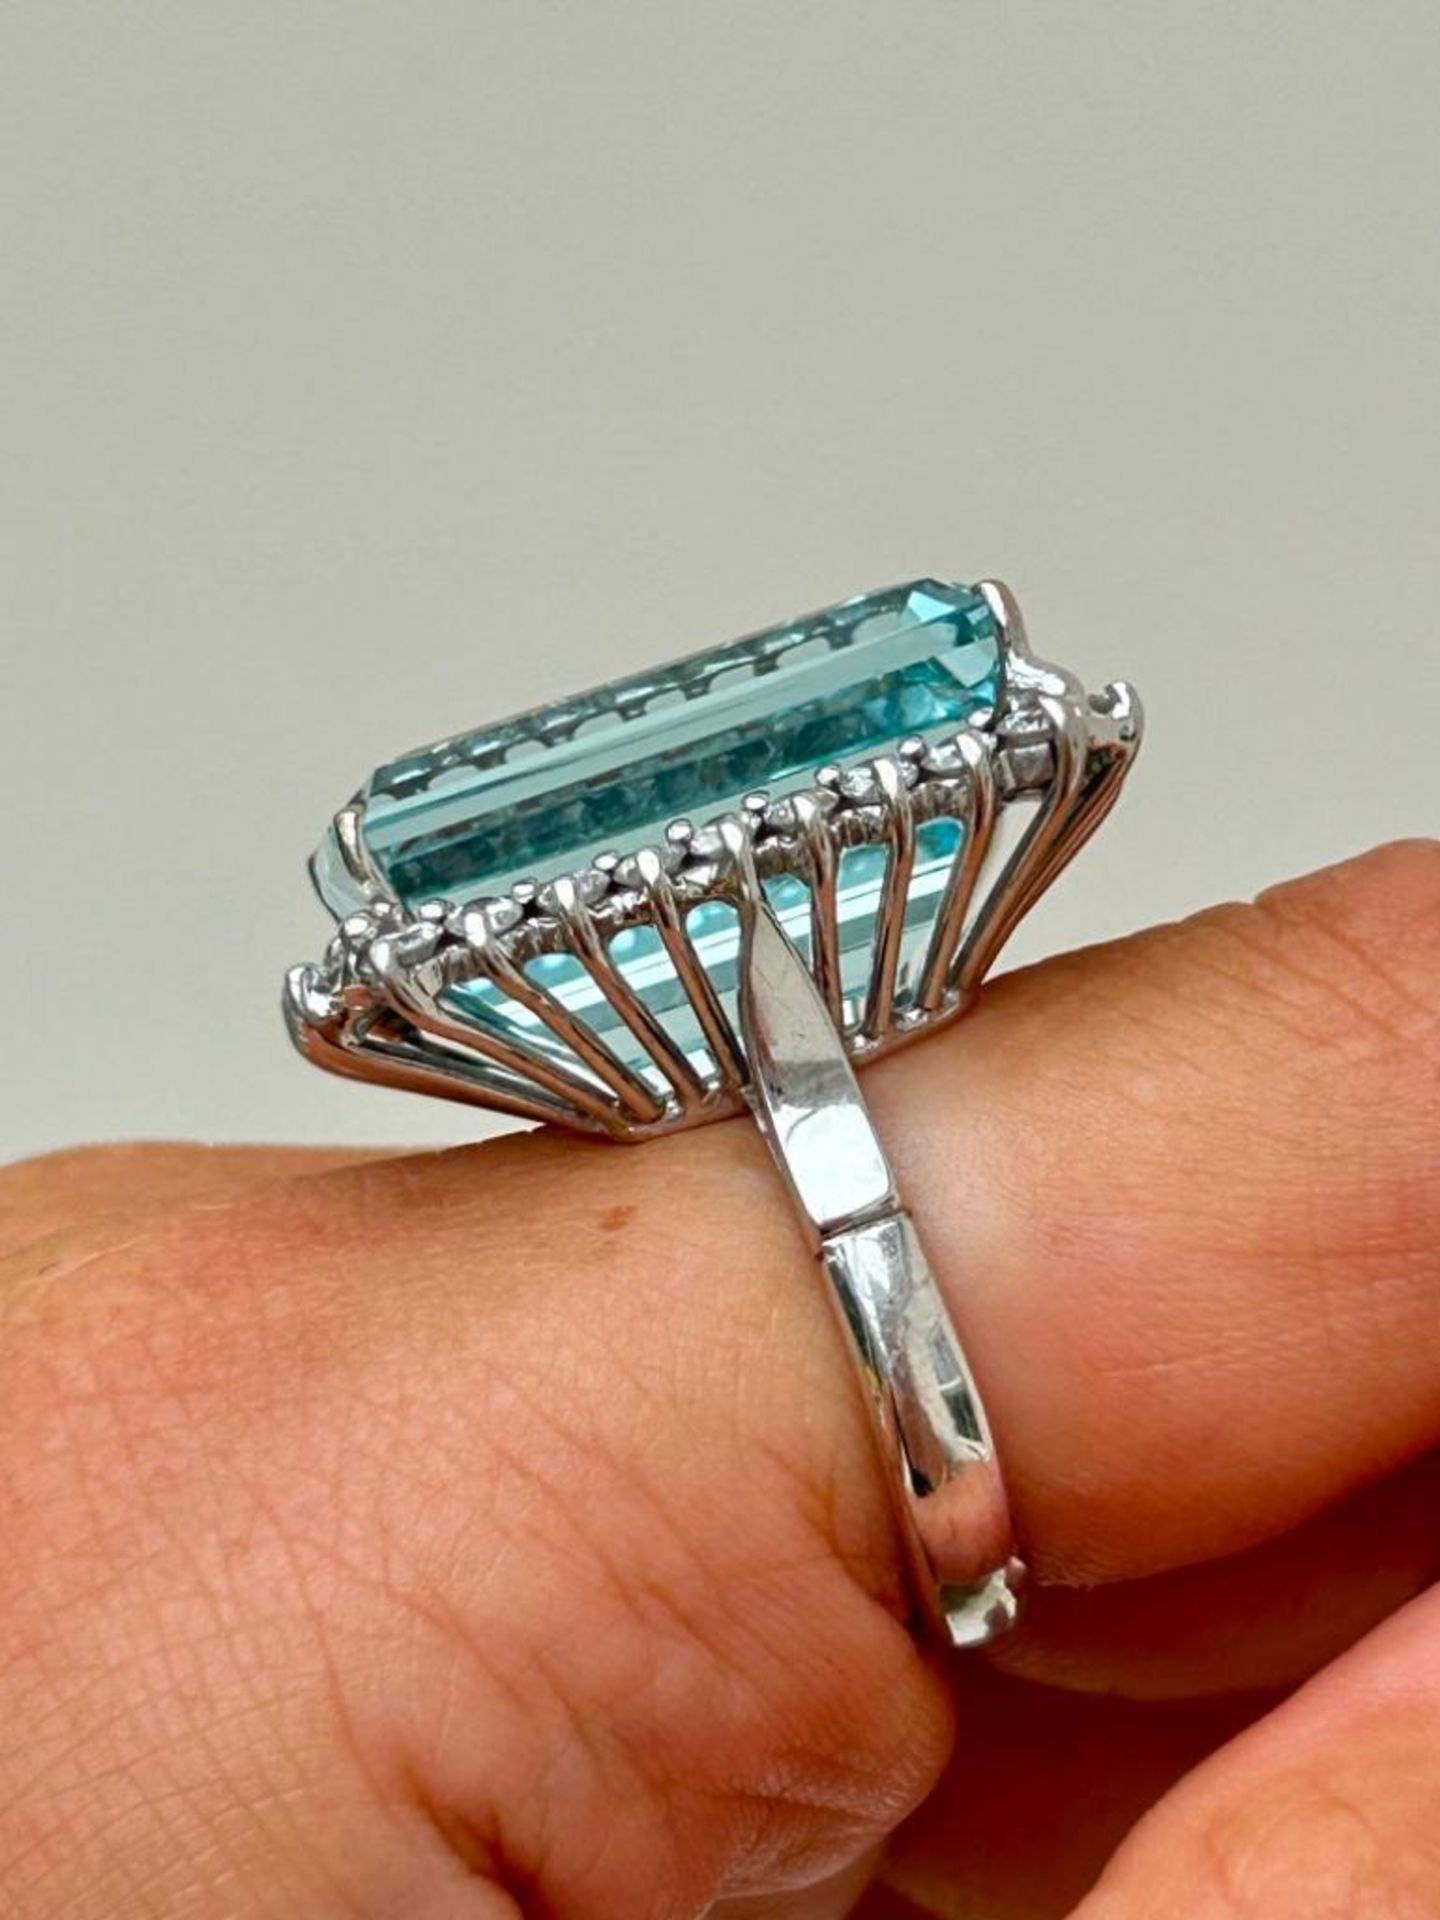 Huge 31ct Aquamarine and Diamond Cocktail Ring in 18ct White Gold - Image 3 of 7